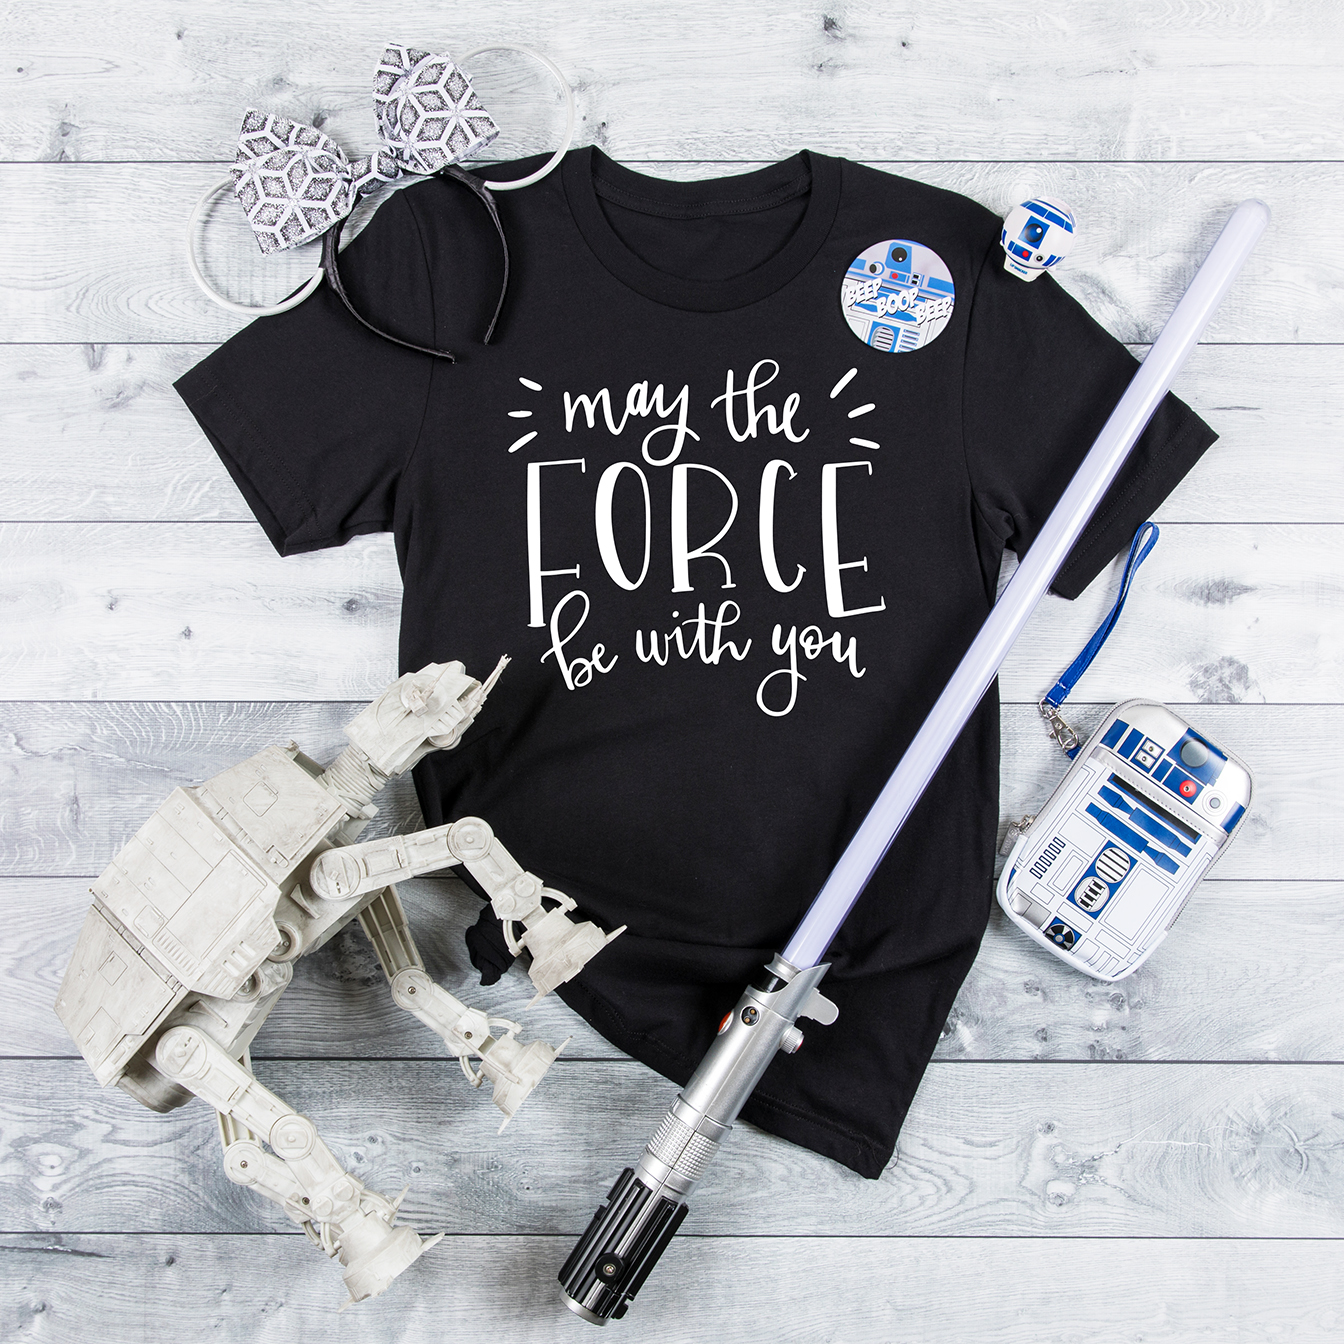 May the Force Be With You FREE Star Wars SVG by DIY Vacation Shirts